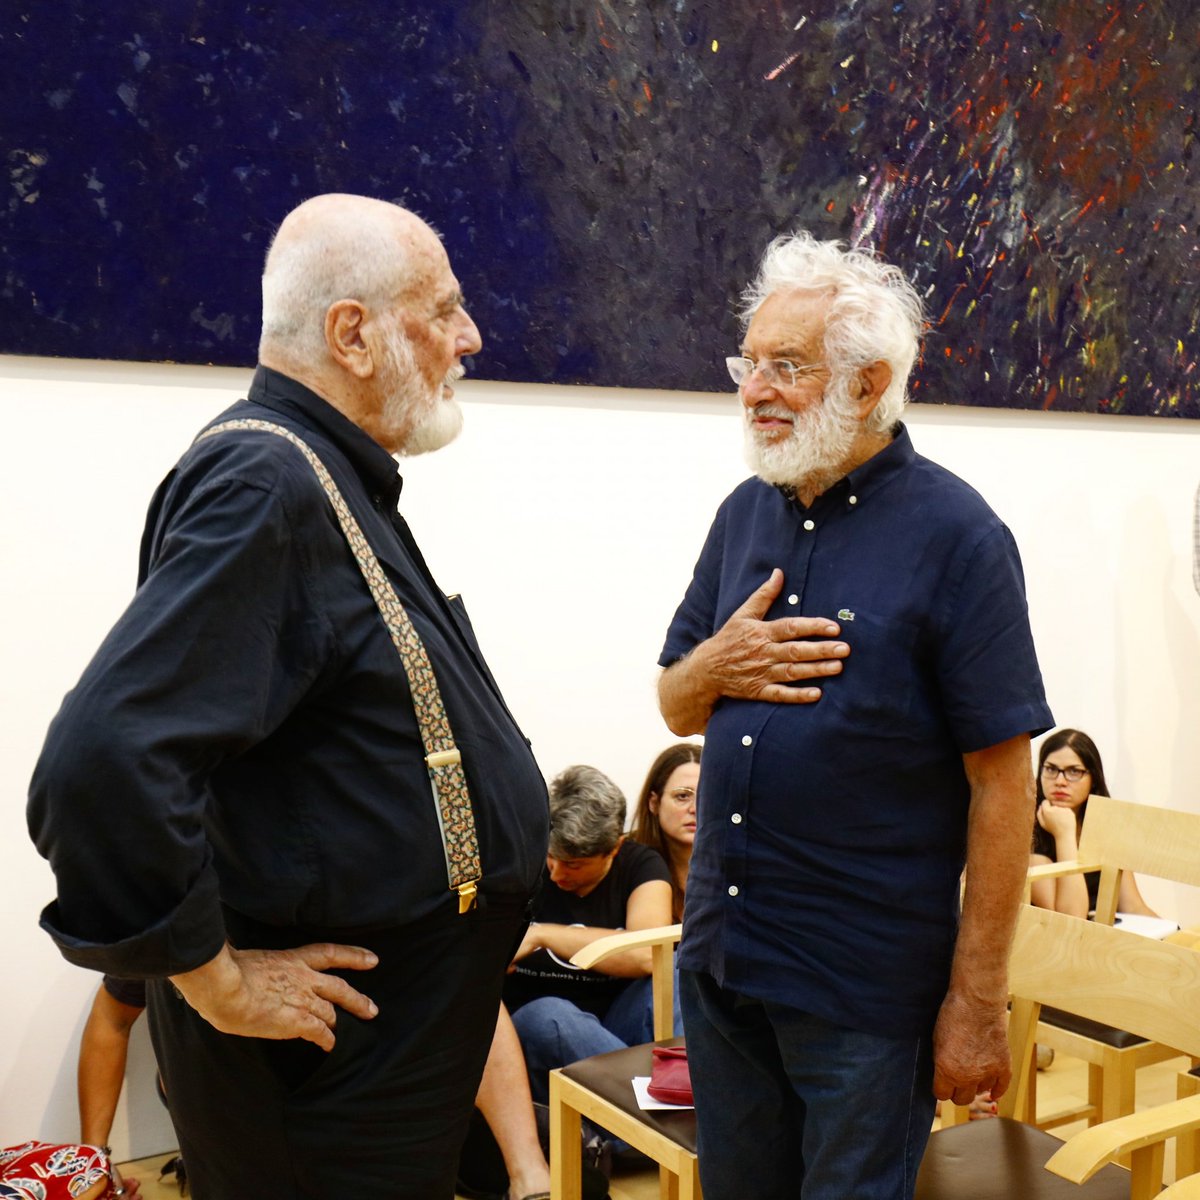 Incontro tra maestri.
#MichelangeloPistoletto e #MimmoJodice al #museoMadre (2019)
#throwbackmadre #throwbackthursday